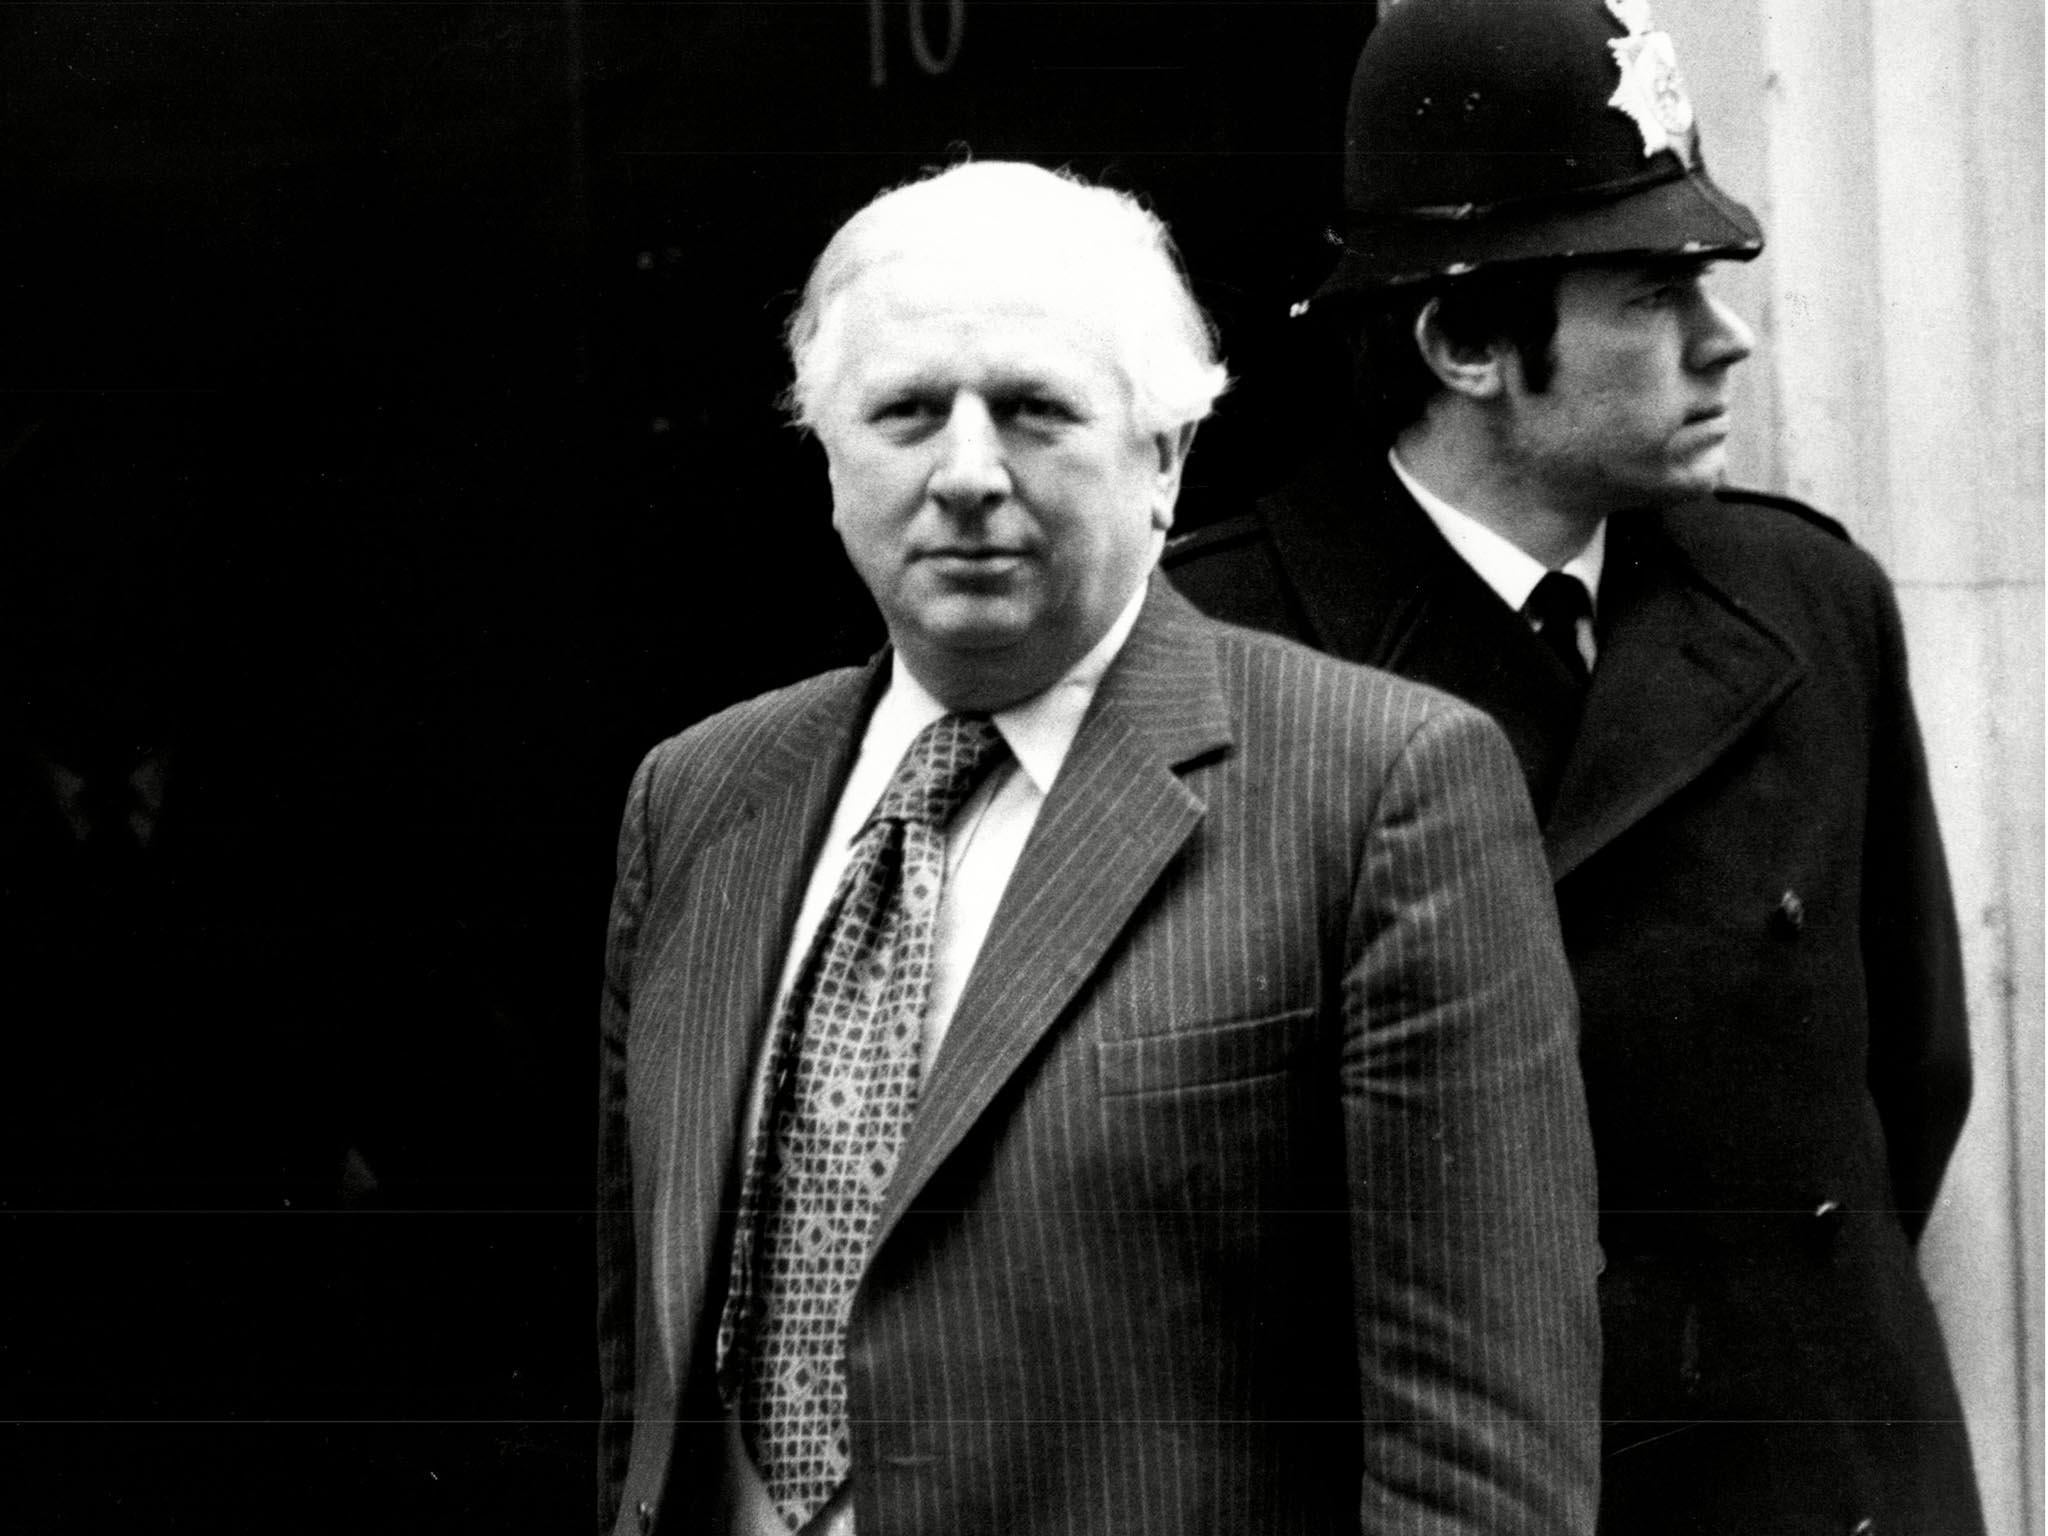 In Parliament, Prior’s career prospects were changed significantly by his appointment as PPS in 1965